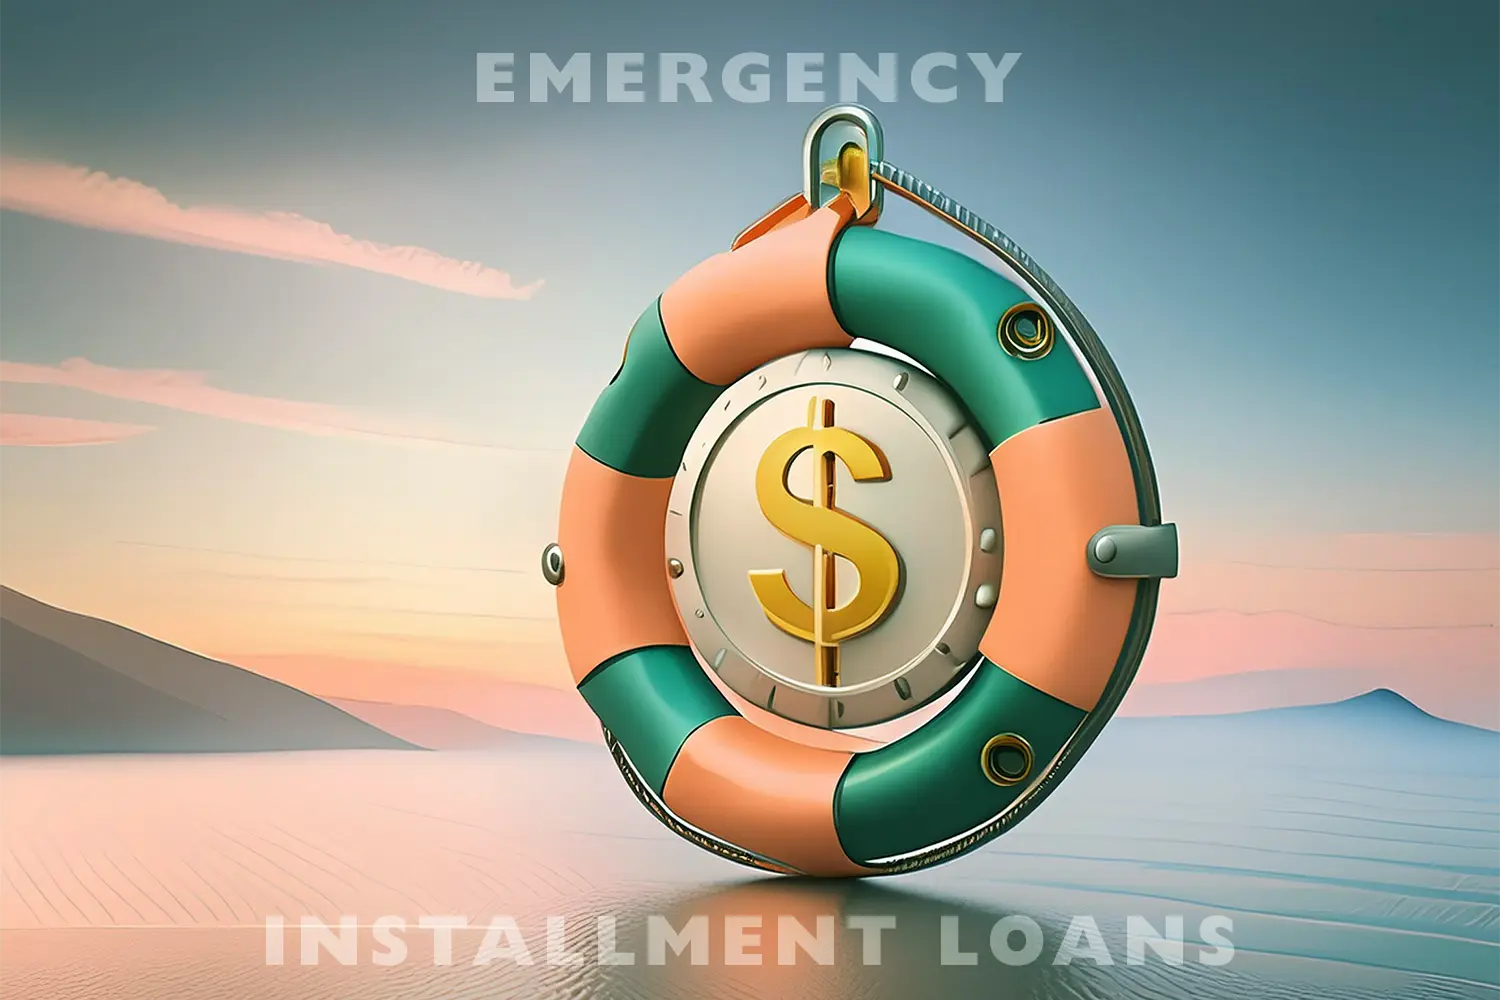 Emergency Installment Loans: A Guide for Unexpected Expenses